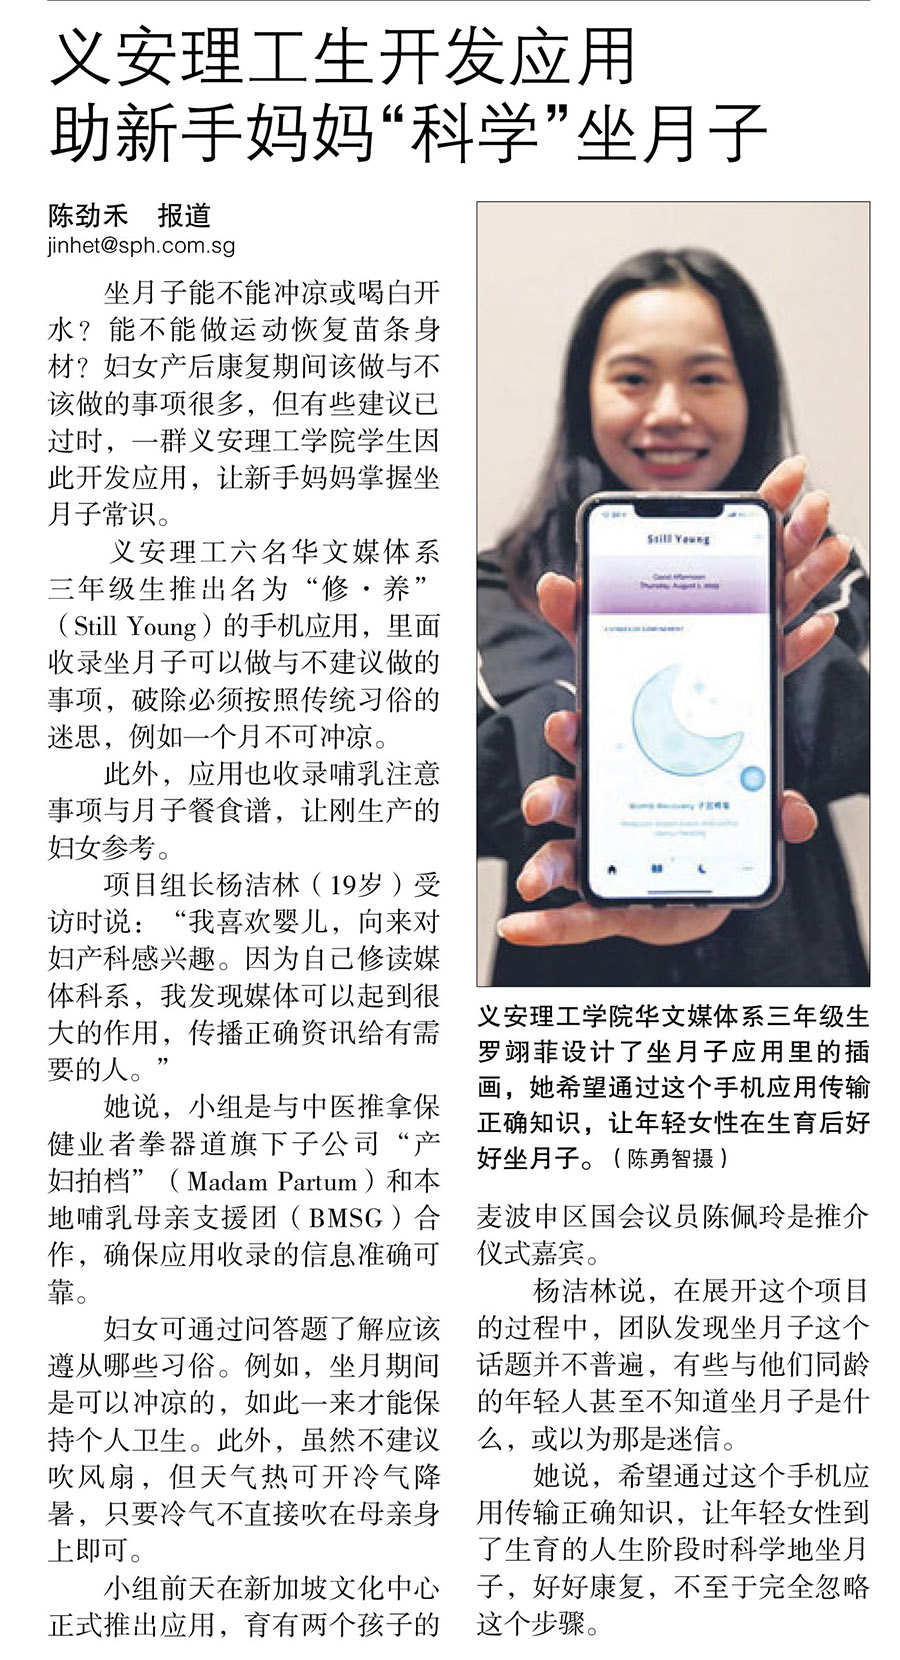 NP students develop app for new mothers to cope with confinement